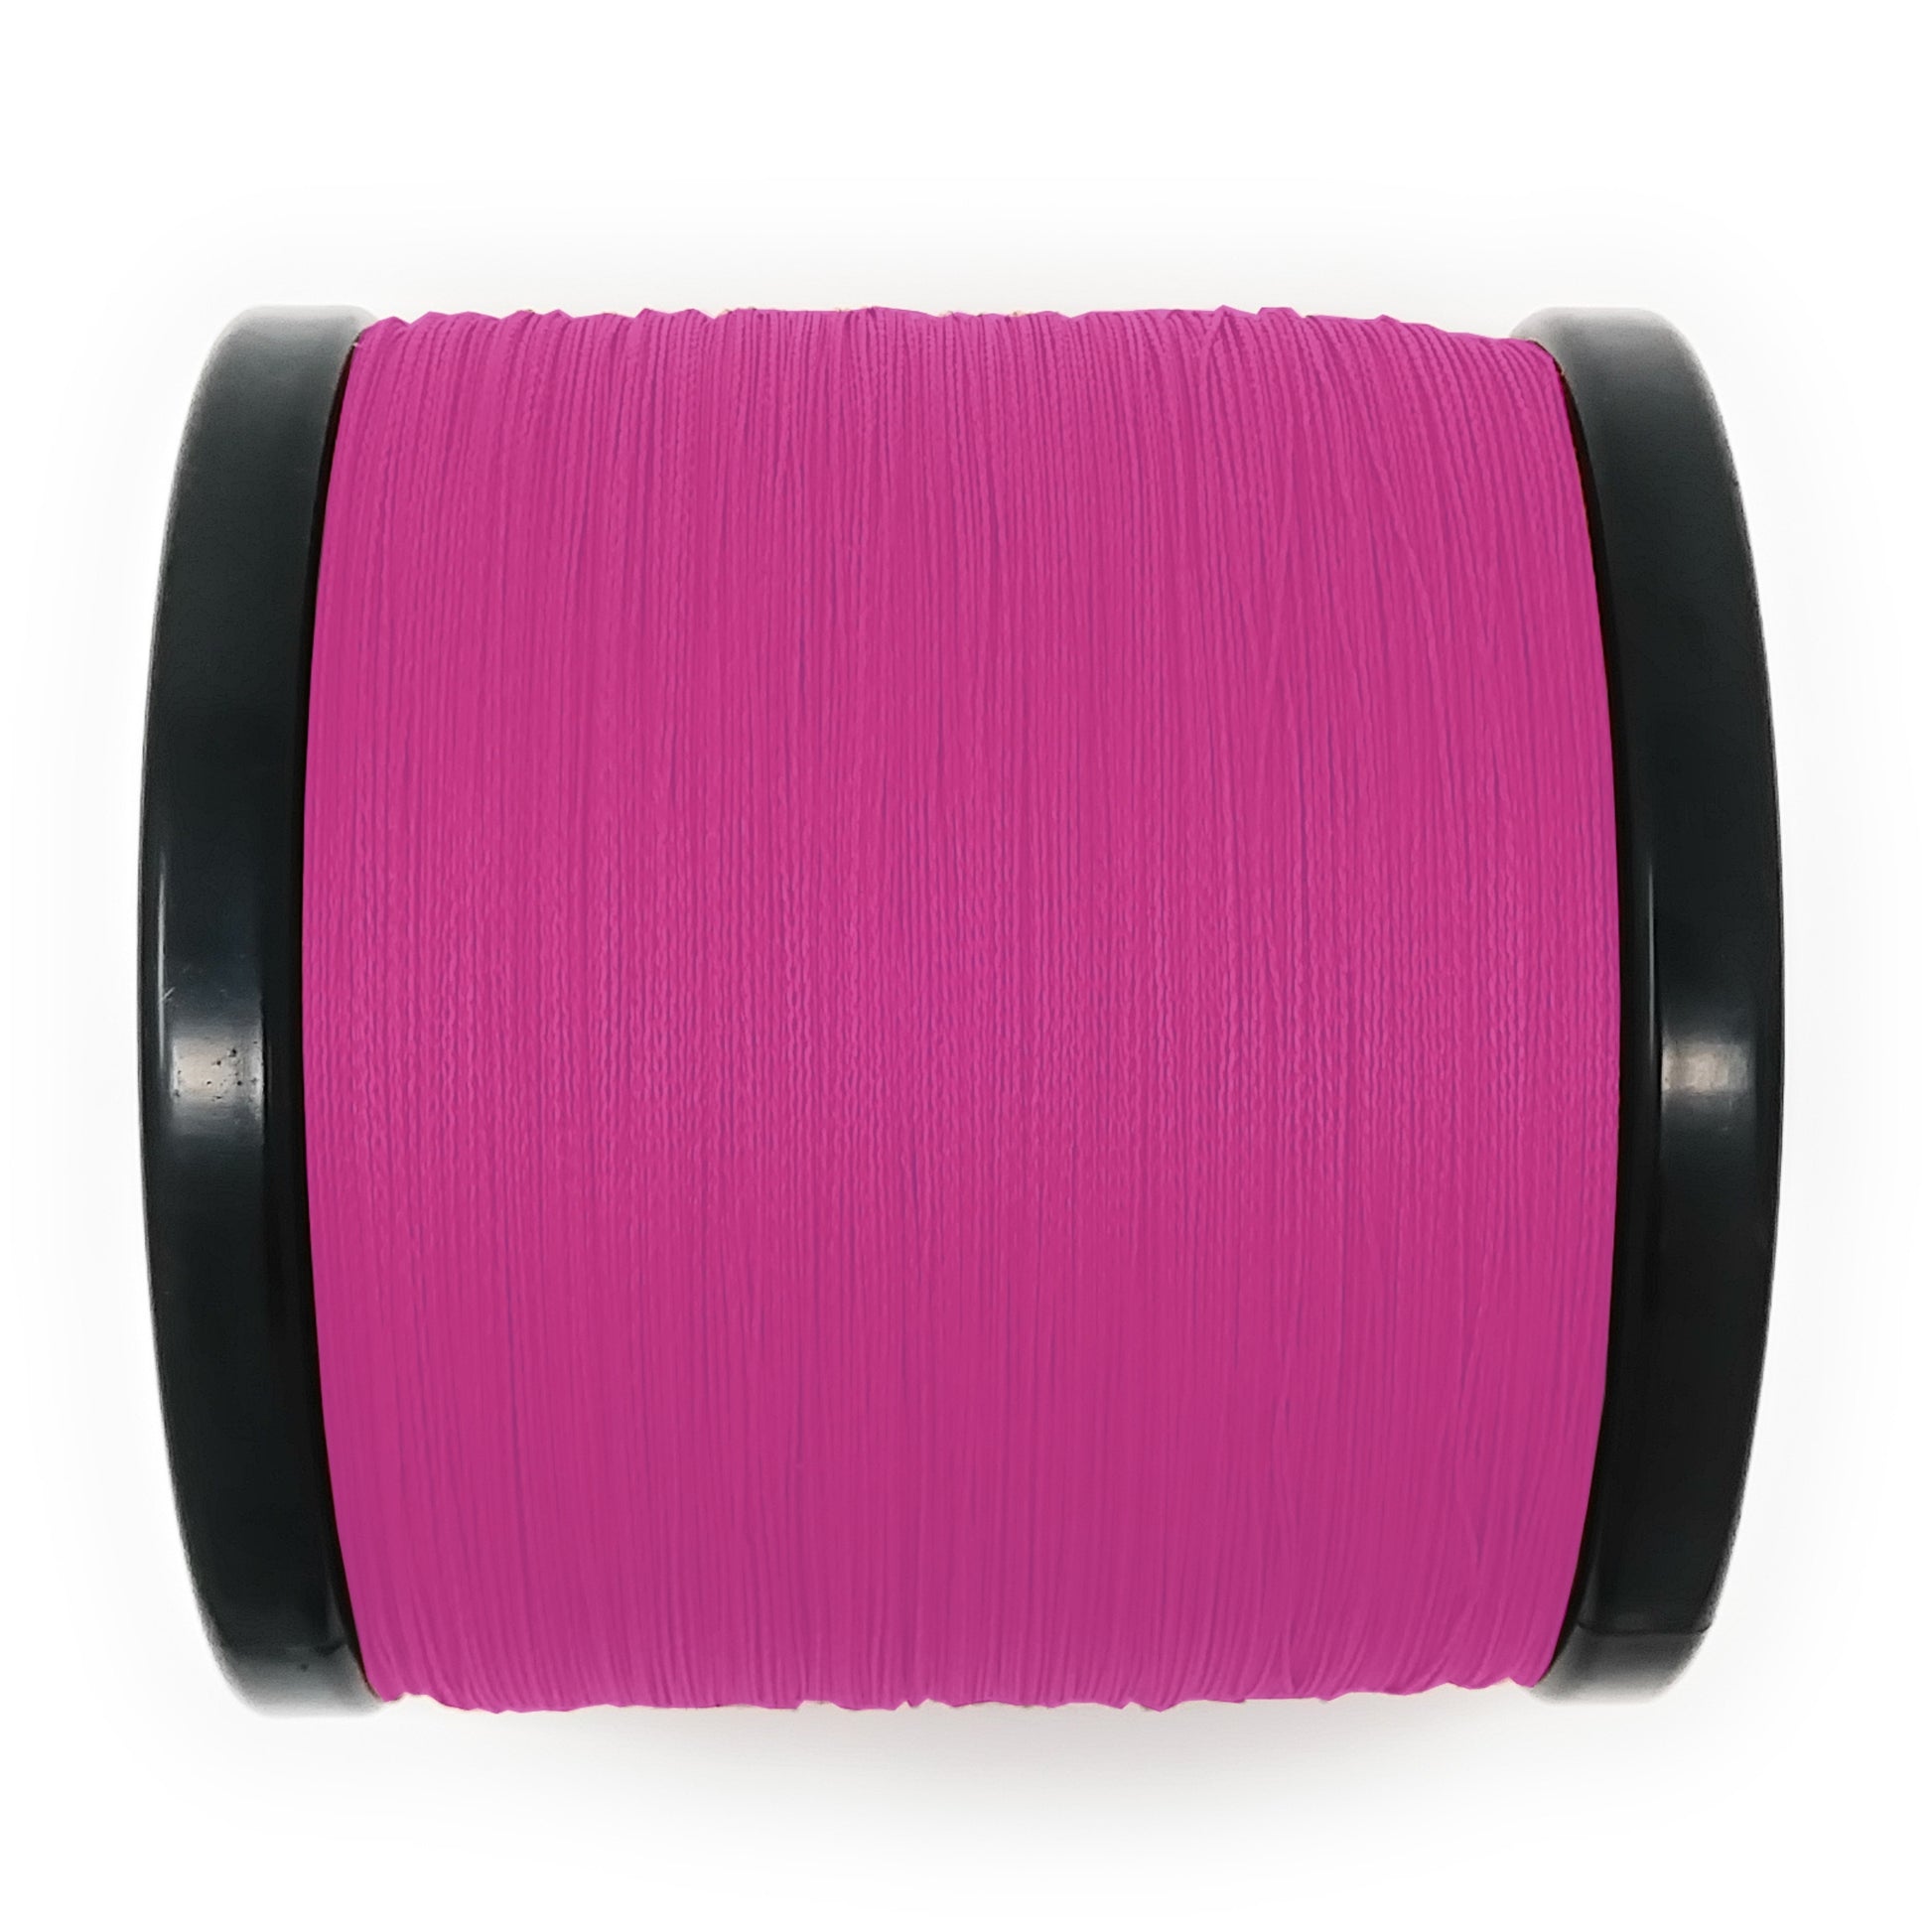 Reaction Tackle High Performance Braided Fishing Line / Braid - Pink